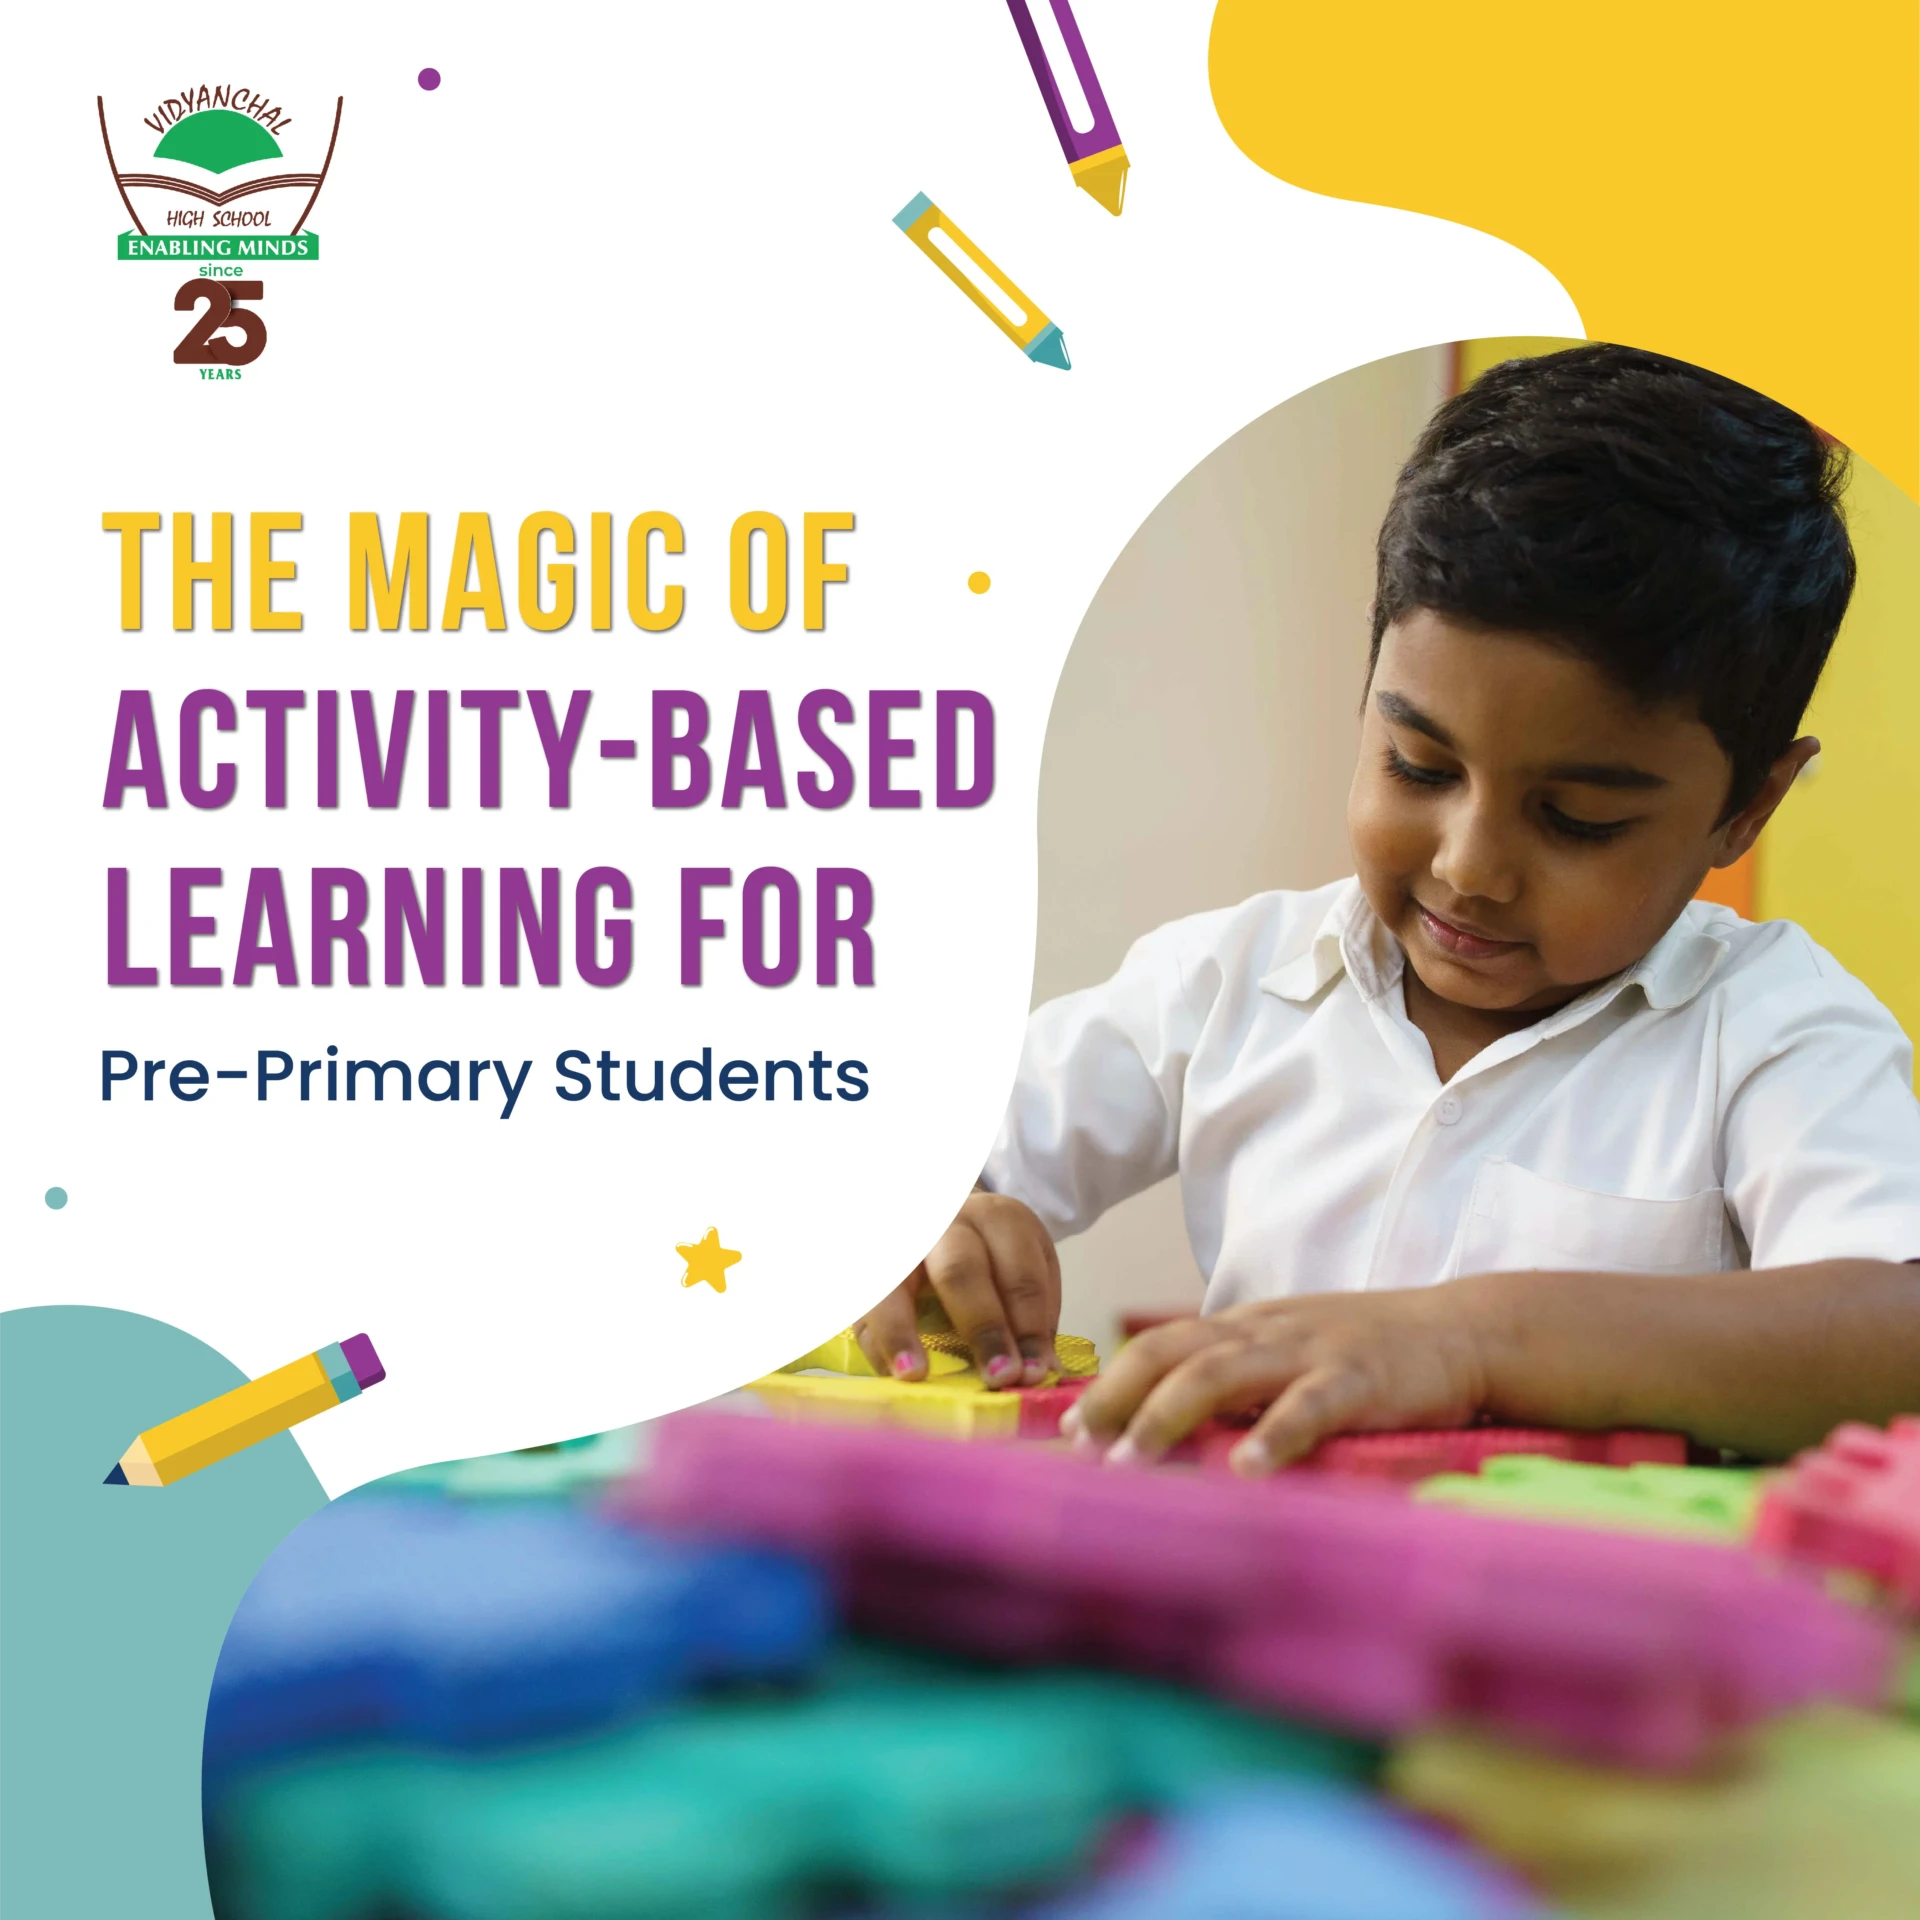 Activity based learning